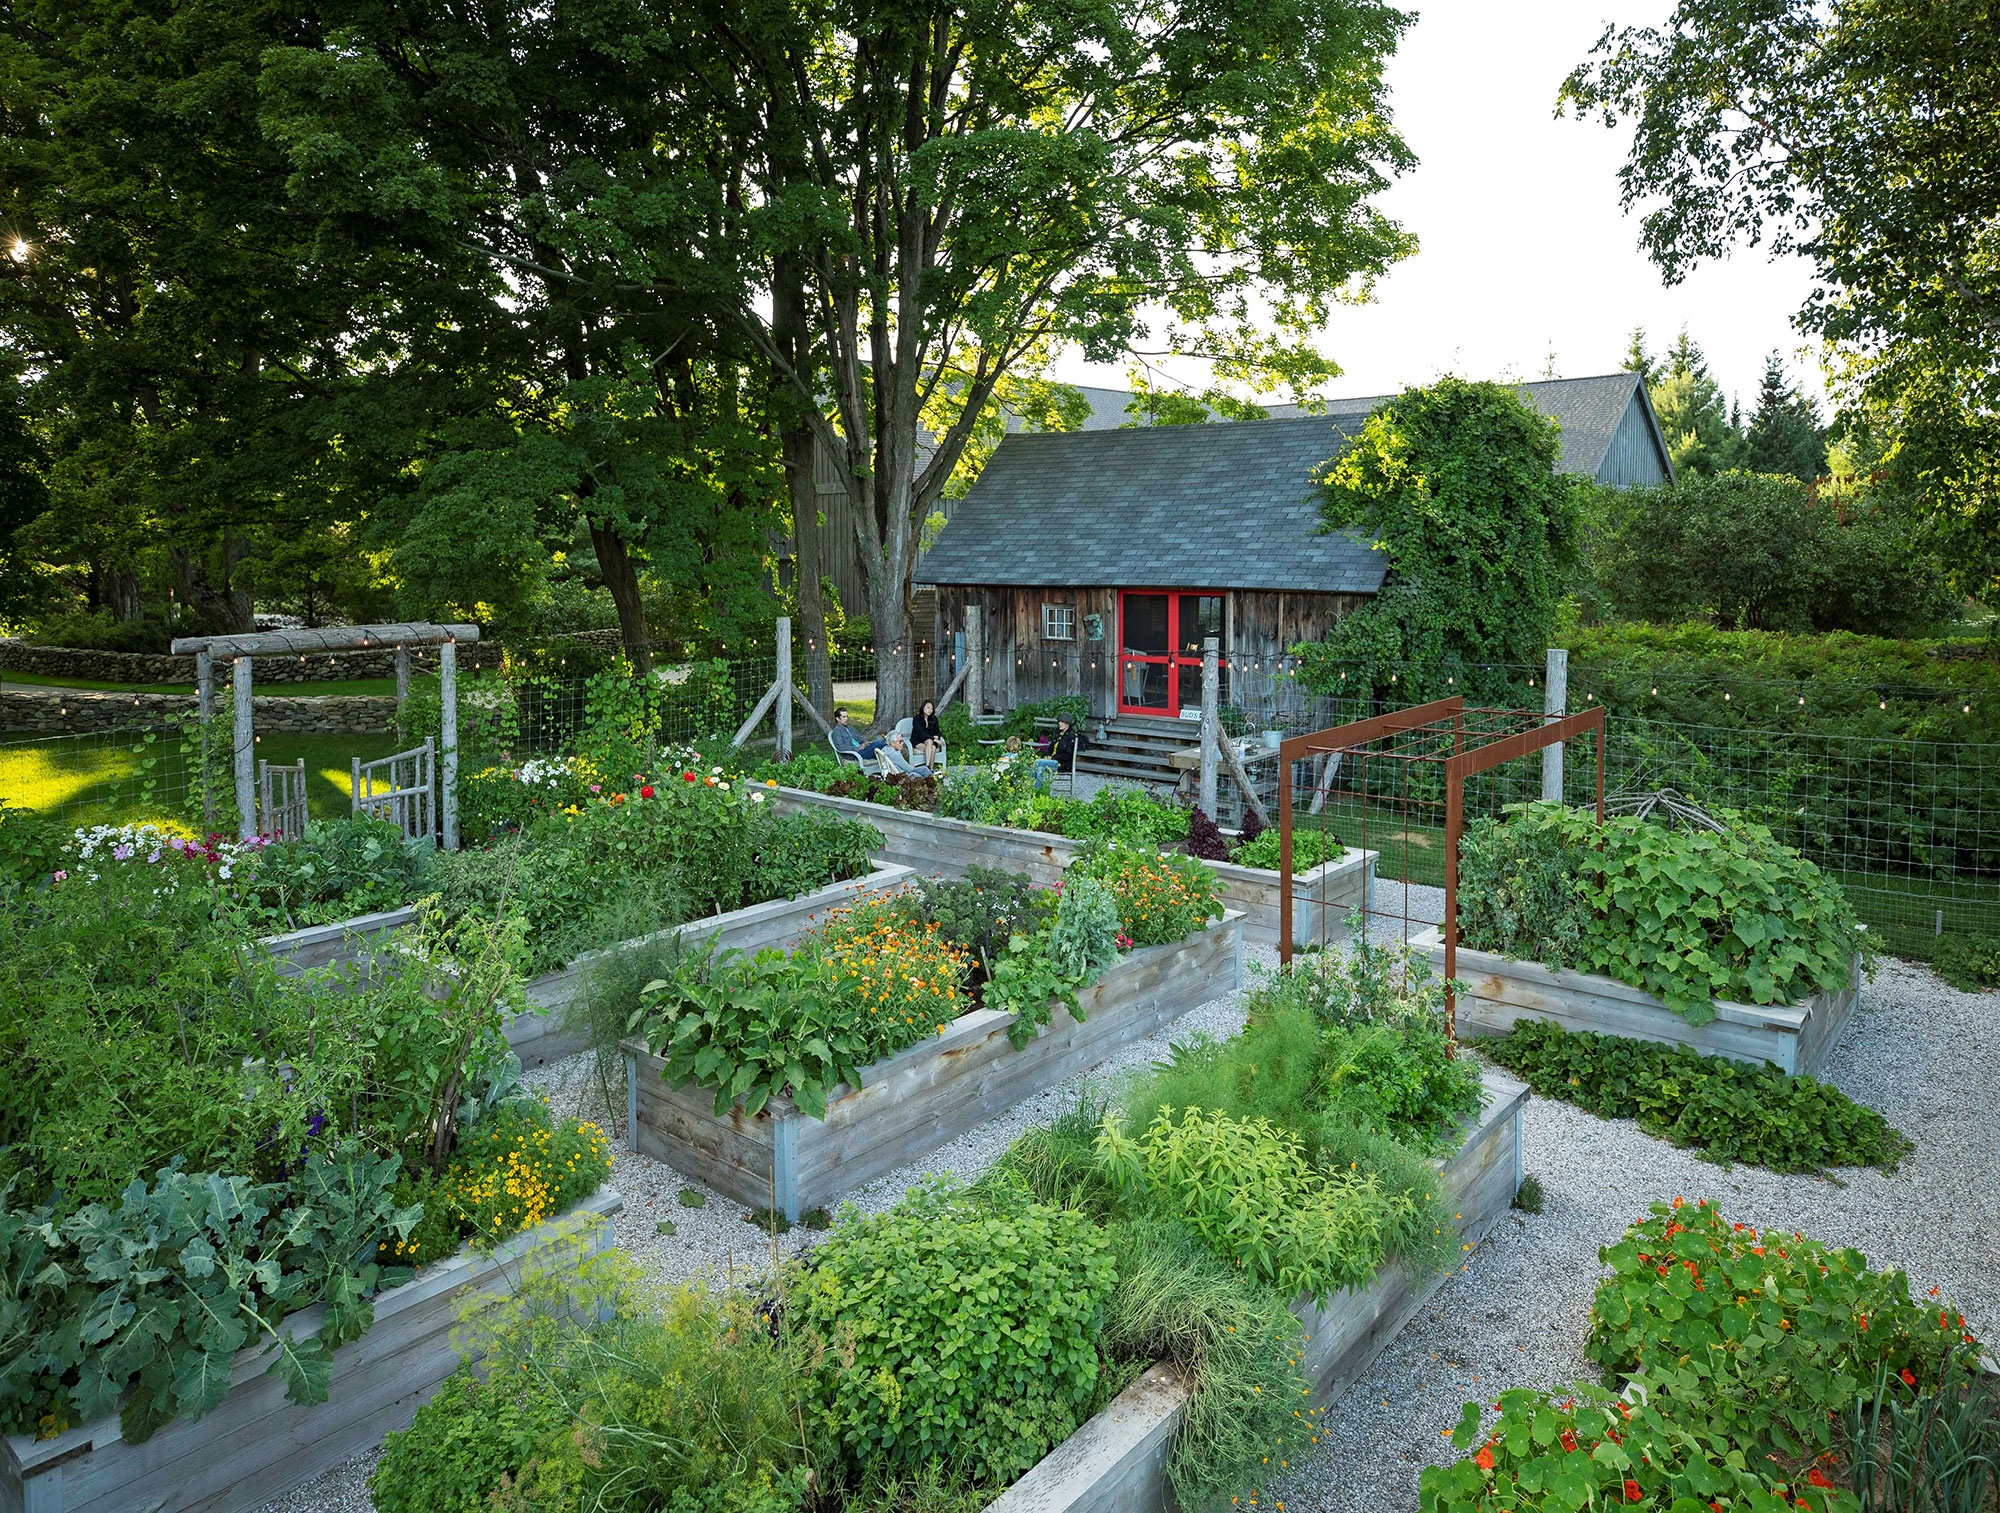 Cottage with raised beds of herbs and vegetables